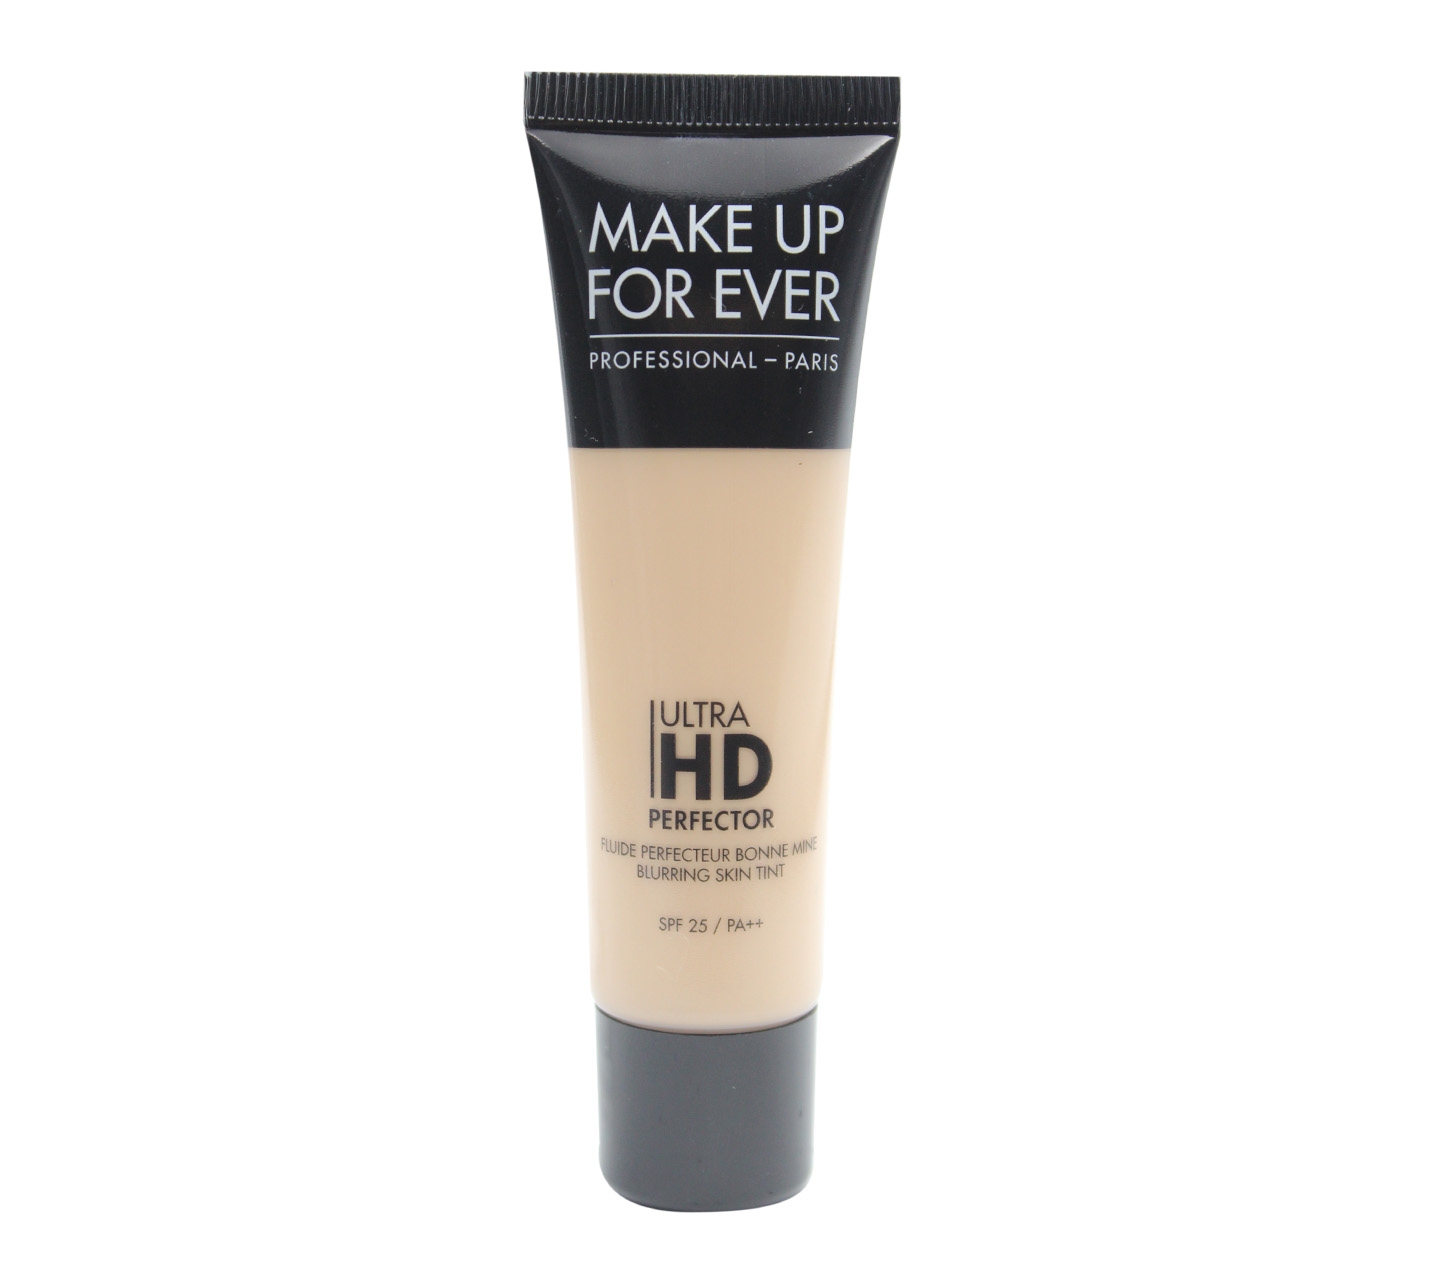 Make Up For Ever 03 Ultra HD Perfector Faces